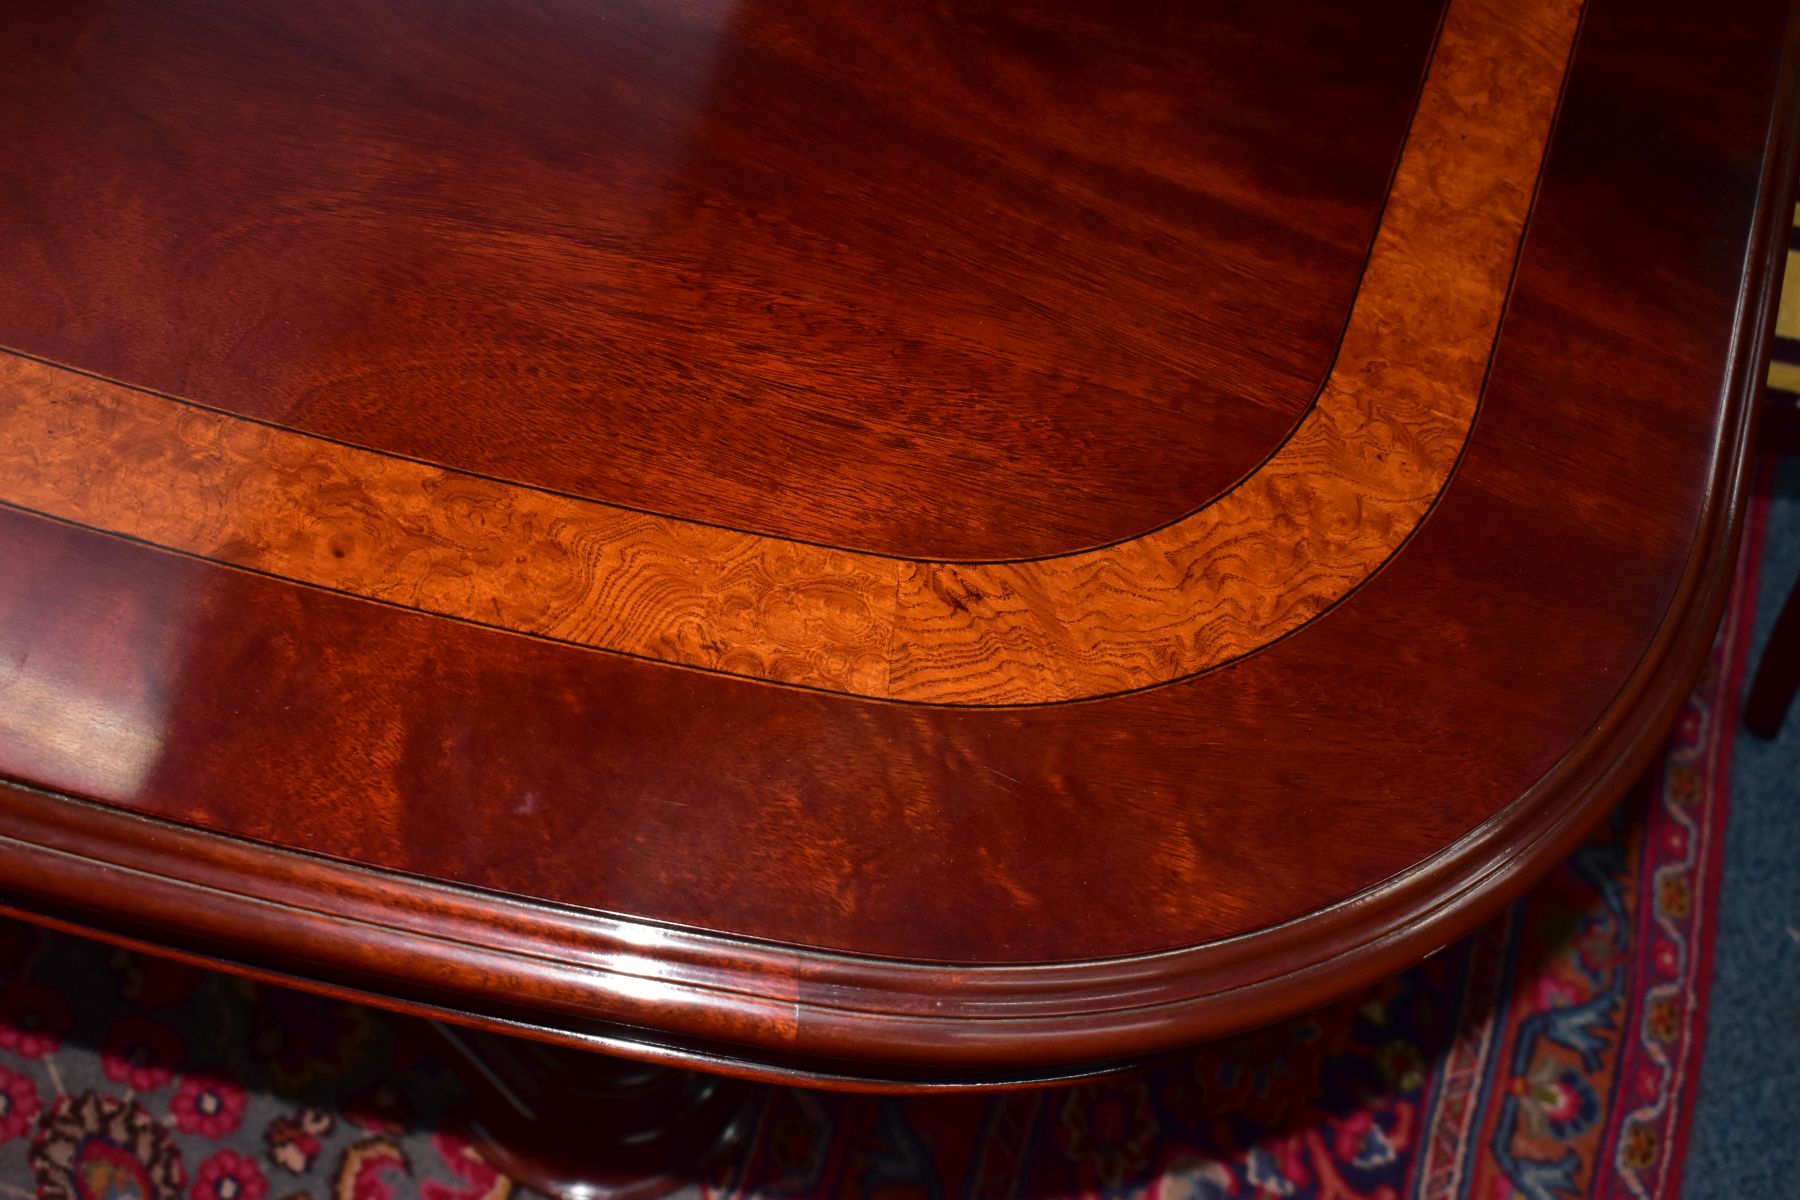 A CHARLES BARR MAHOGANY AND BURR WOOD INLAID EXTENDING PEDESTAL DINING TABLE, with one additional - Image 11 of 19